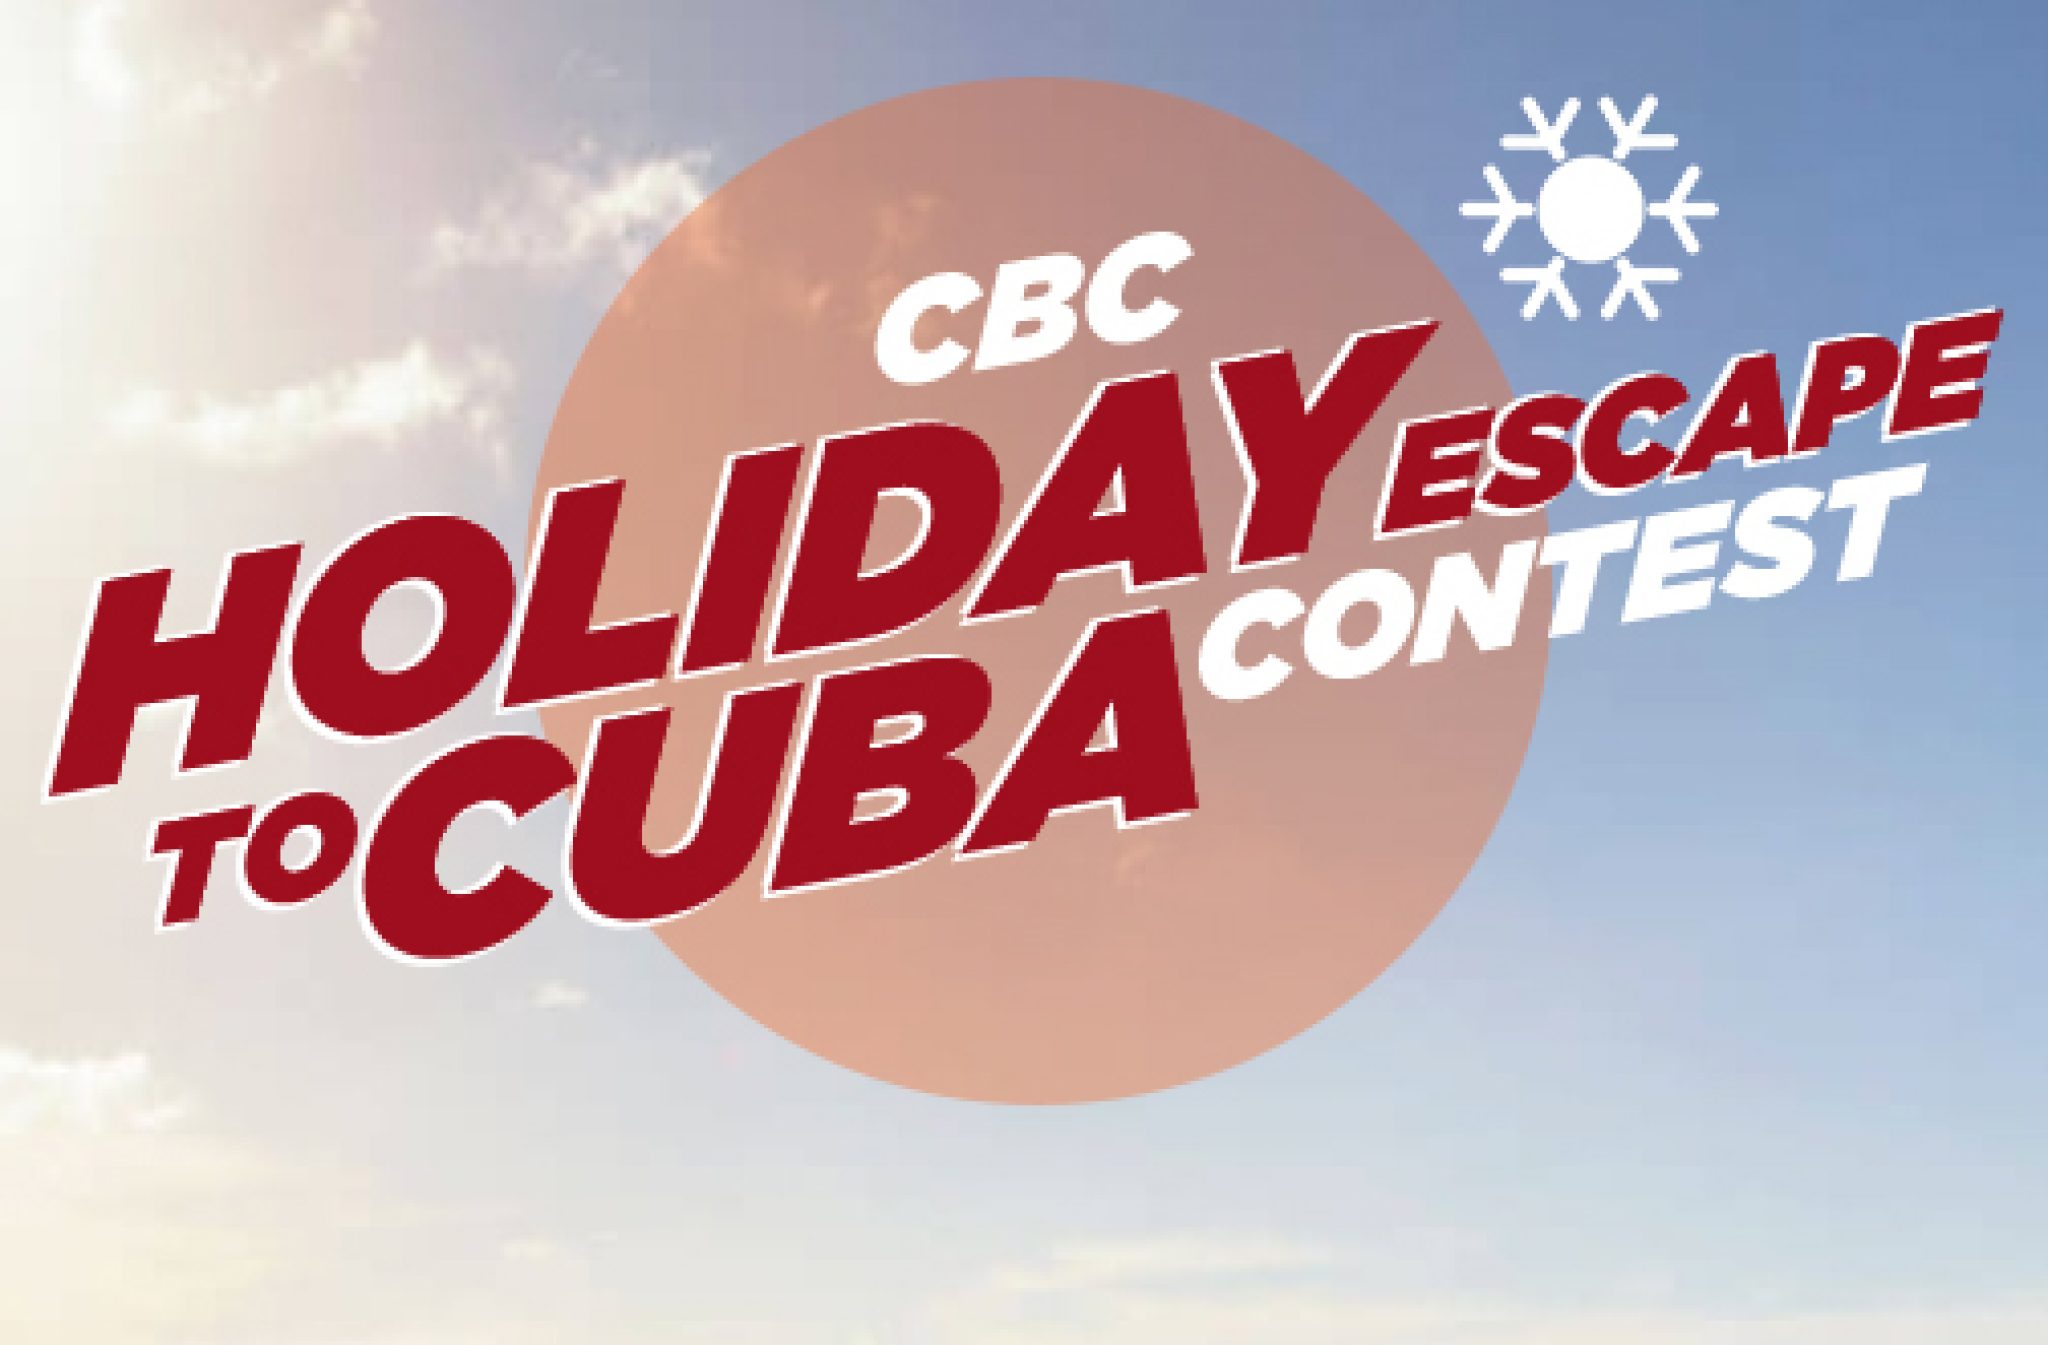 CBC Holiday Escape to Cuba Contest — Deals from SaveaLoonie!